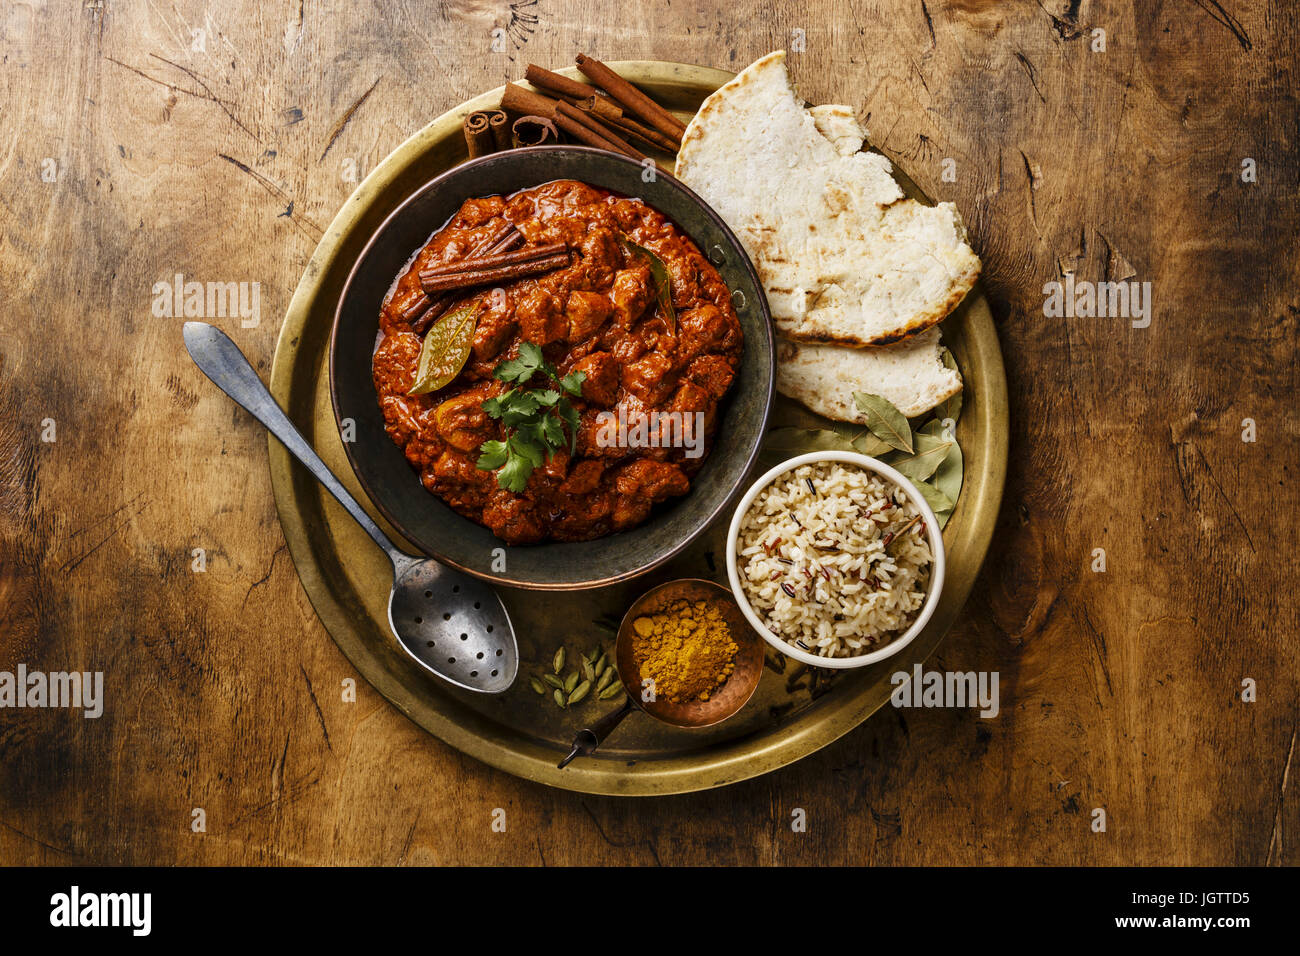 Chicken tikka masala spicy curry meat food in copper pan with rice and naan bread on wooden background Stock Photo